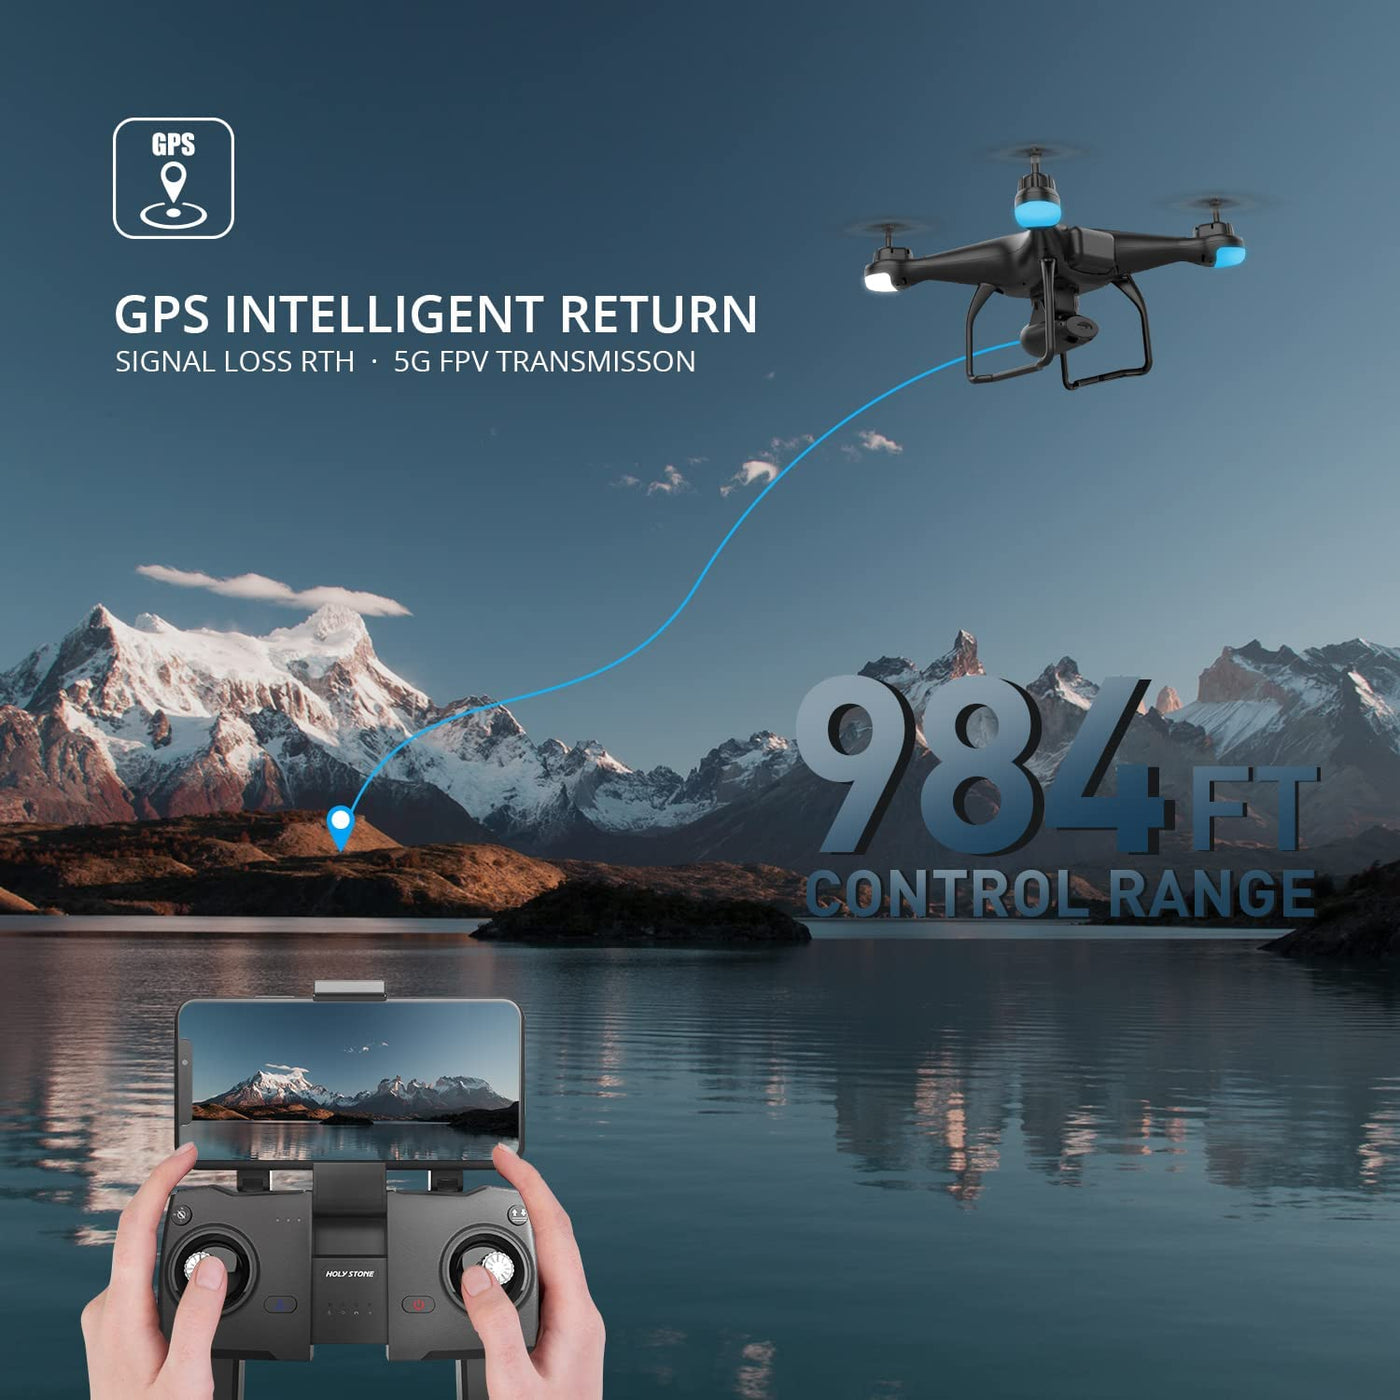 Holy Stone HS120D GPS Drone - $70